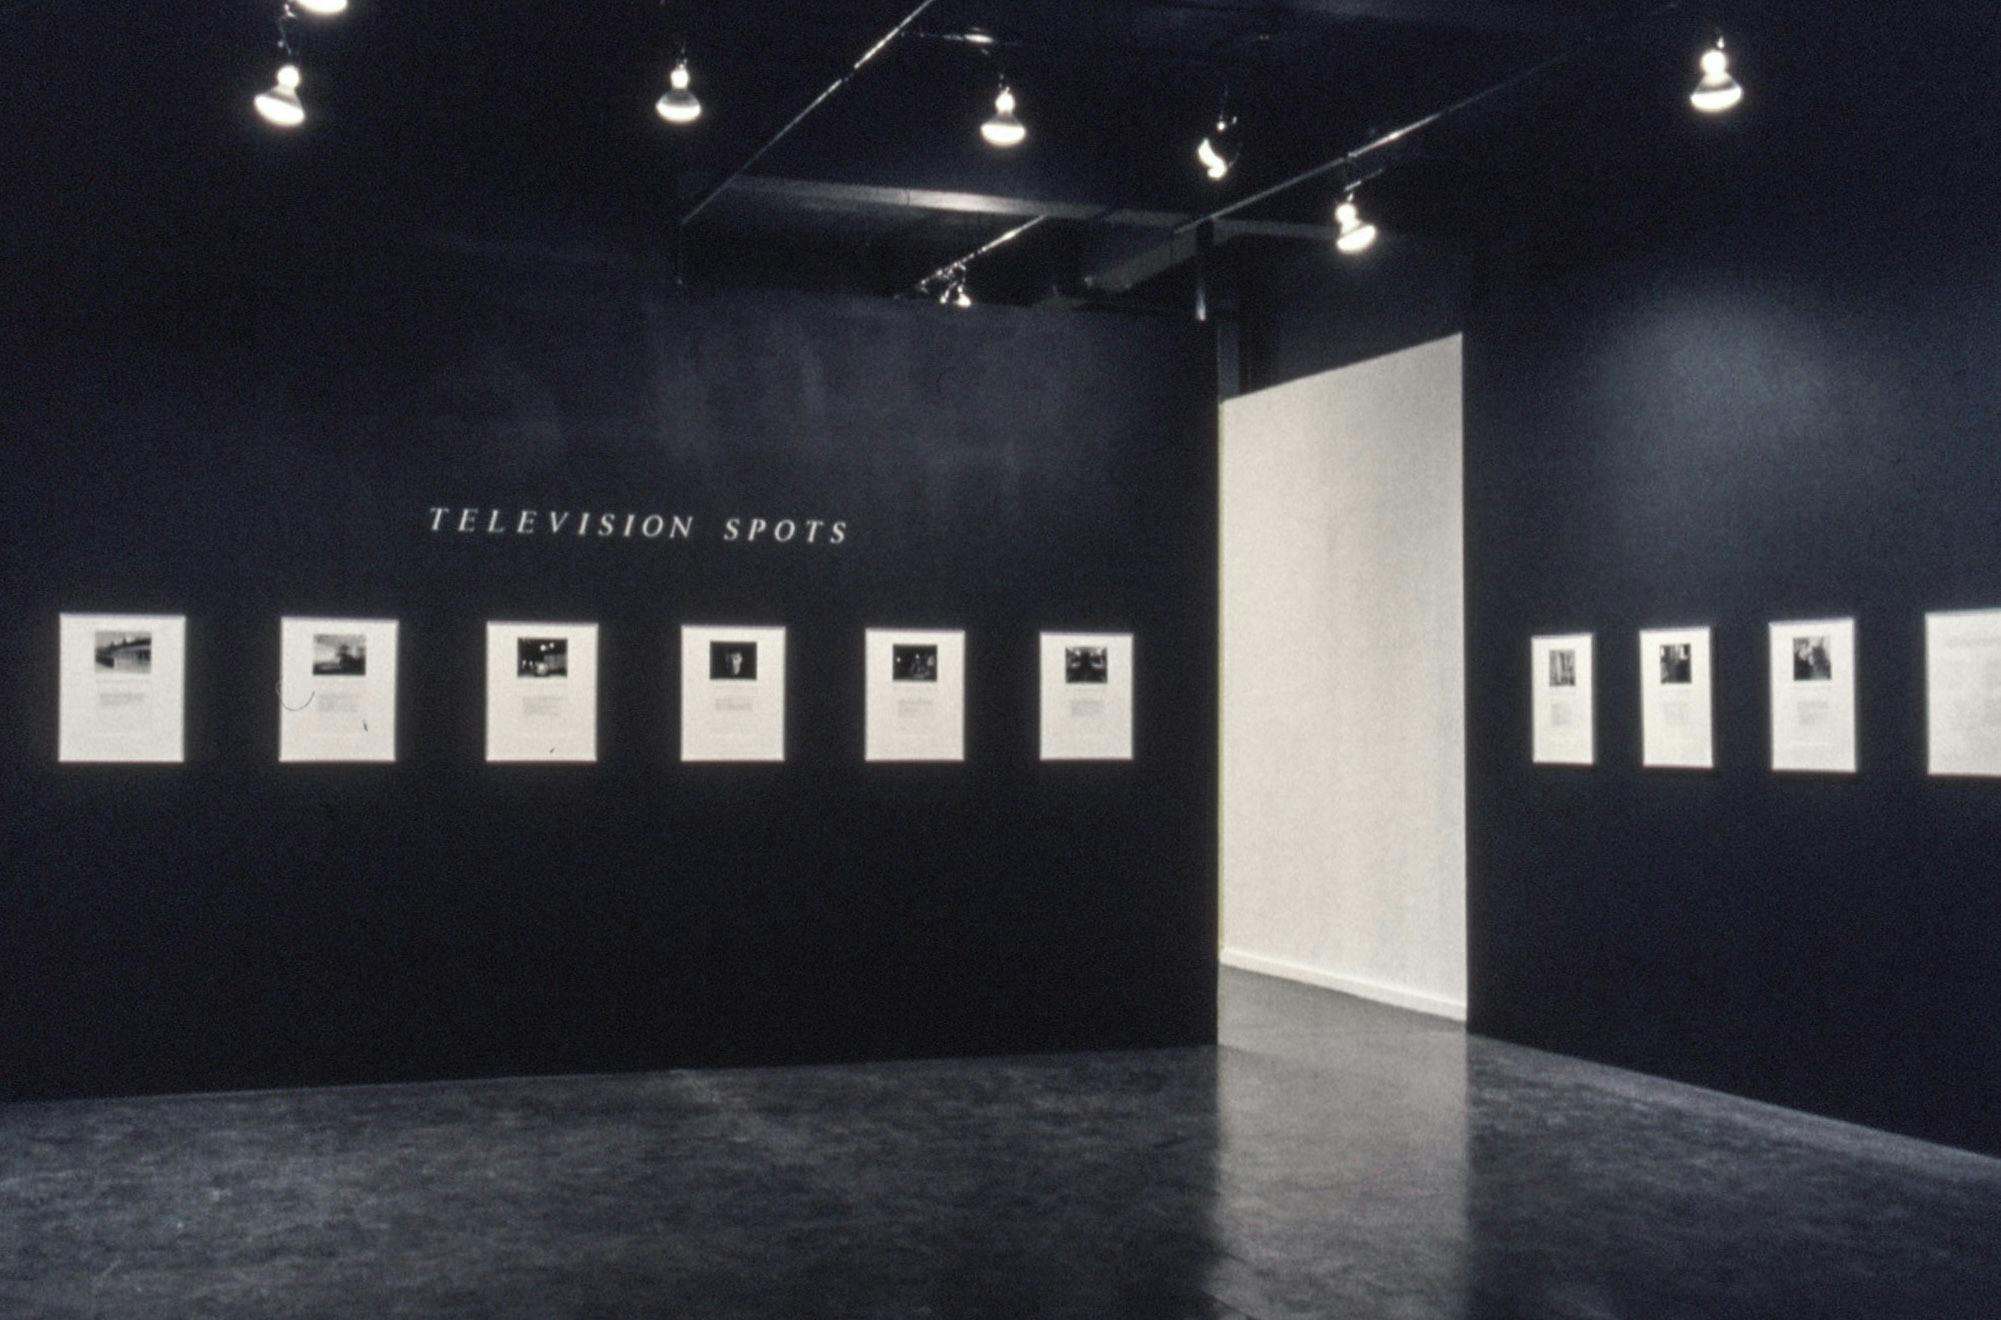 A gallery space with black walls. The wall shows large text reading "Television Spots" and several white artworks on the walls with black and white images and text. 